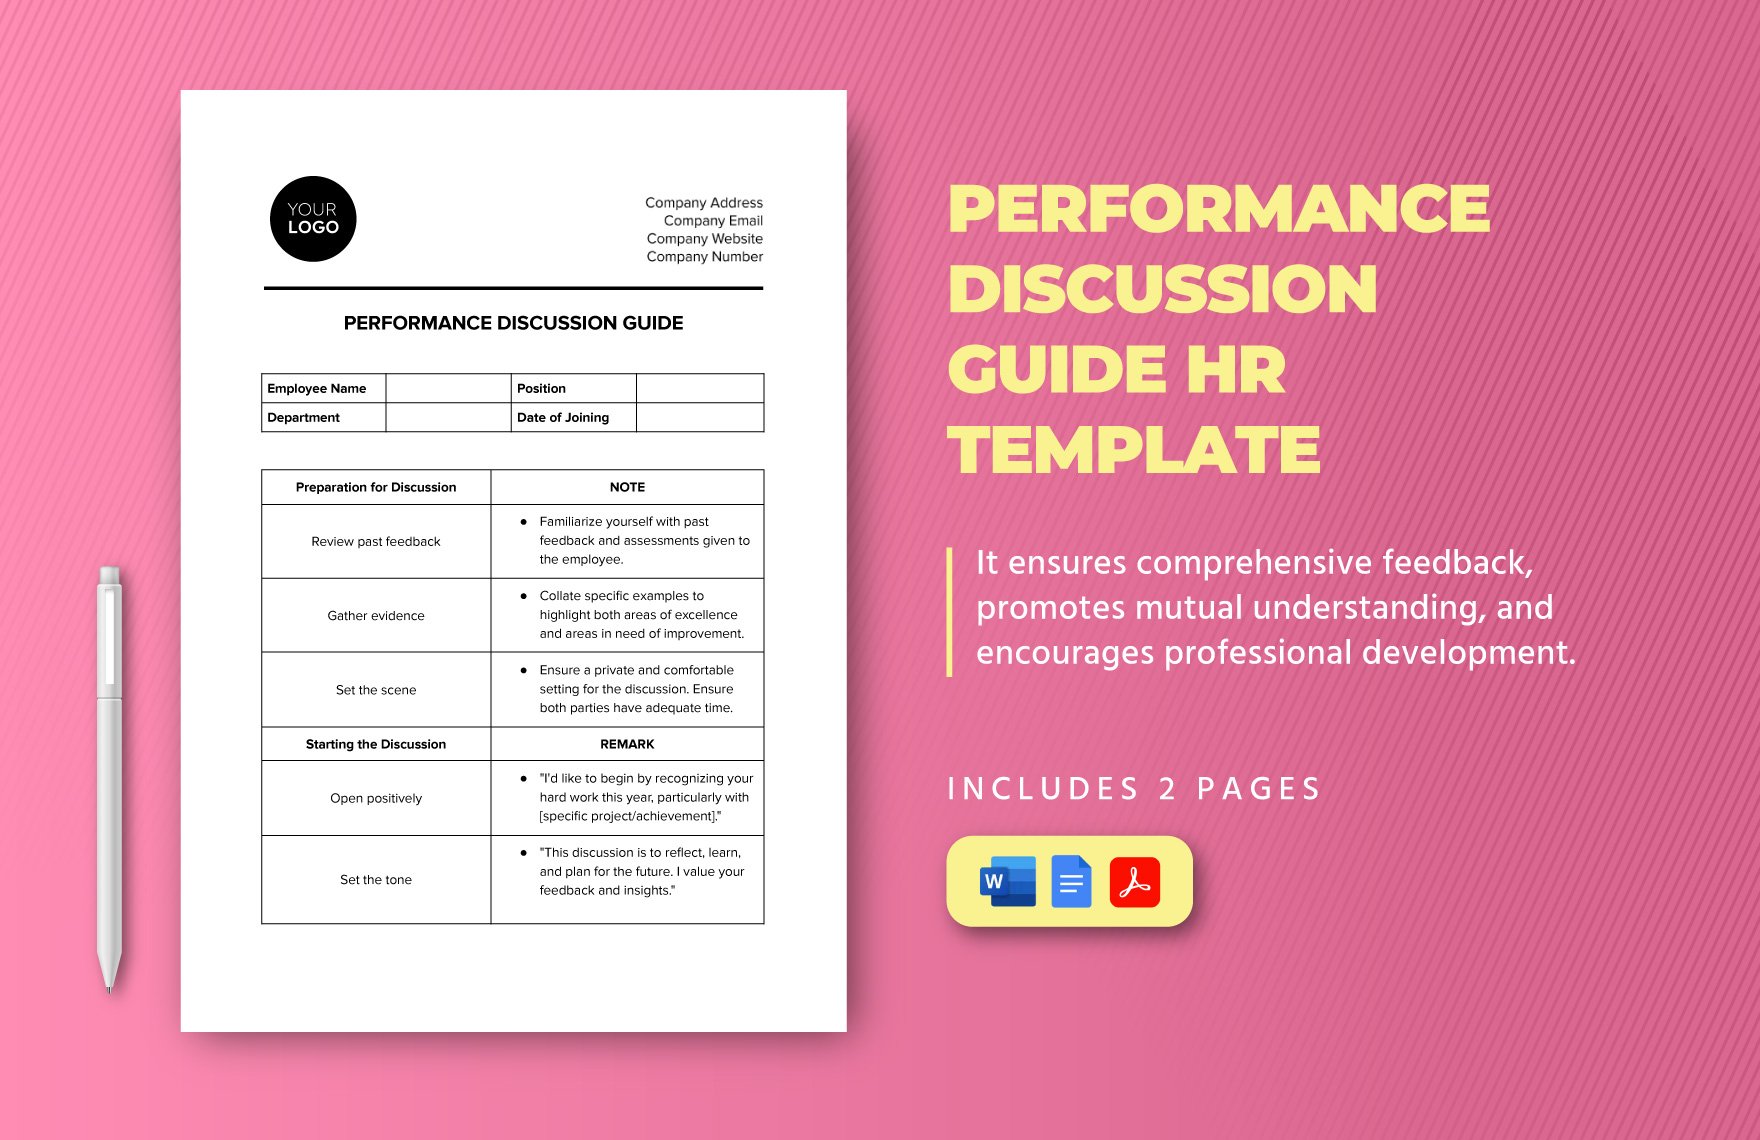 Performance Discussion Guide HR Template